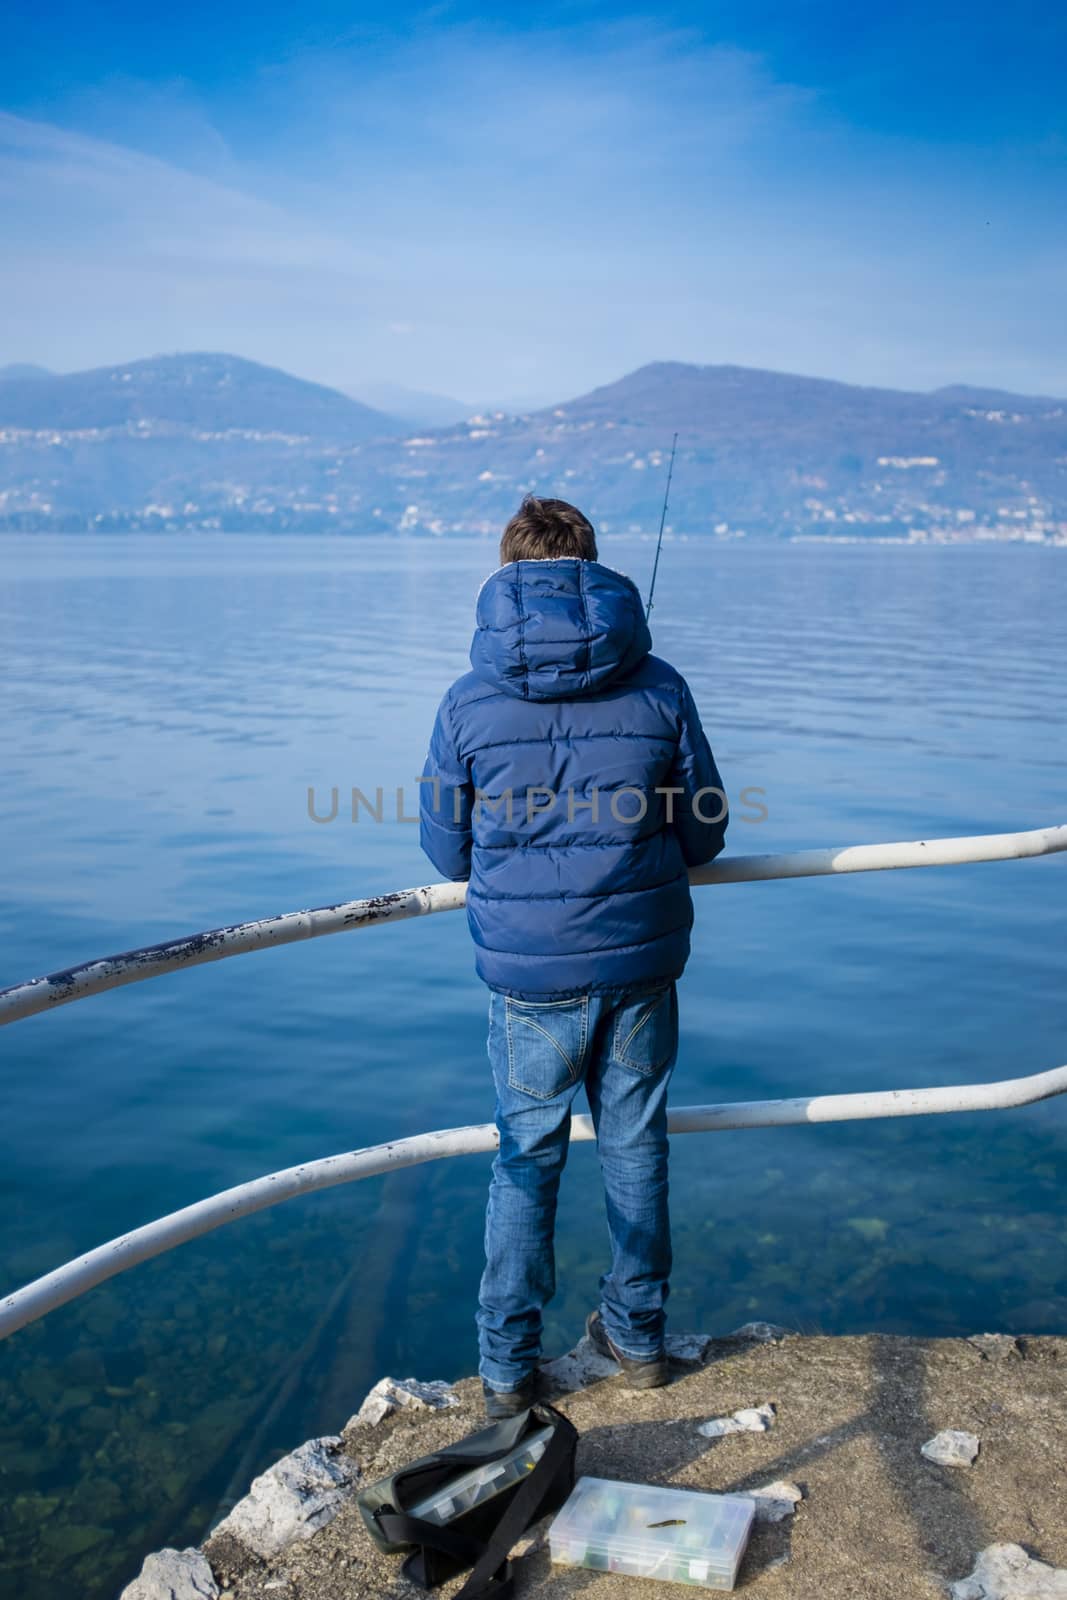 teenager by the lake are fishing in the winter by struki